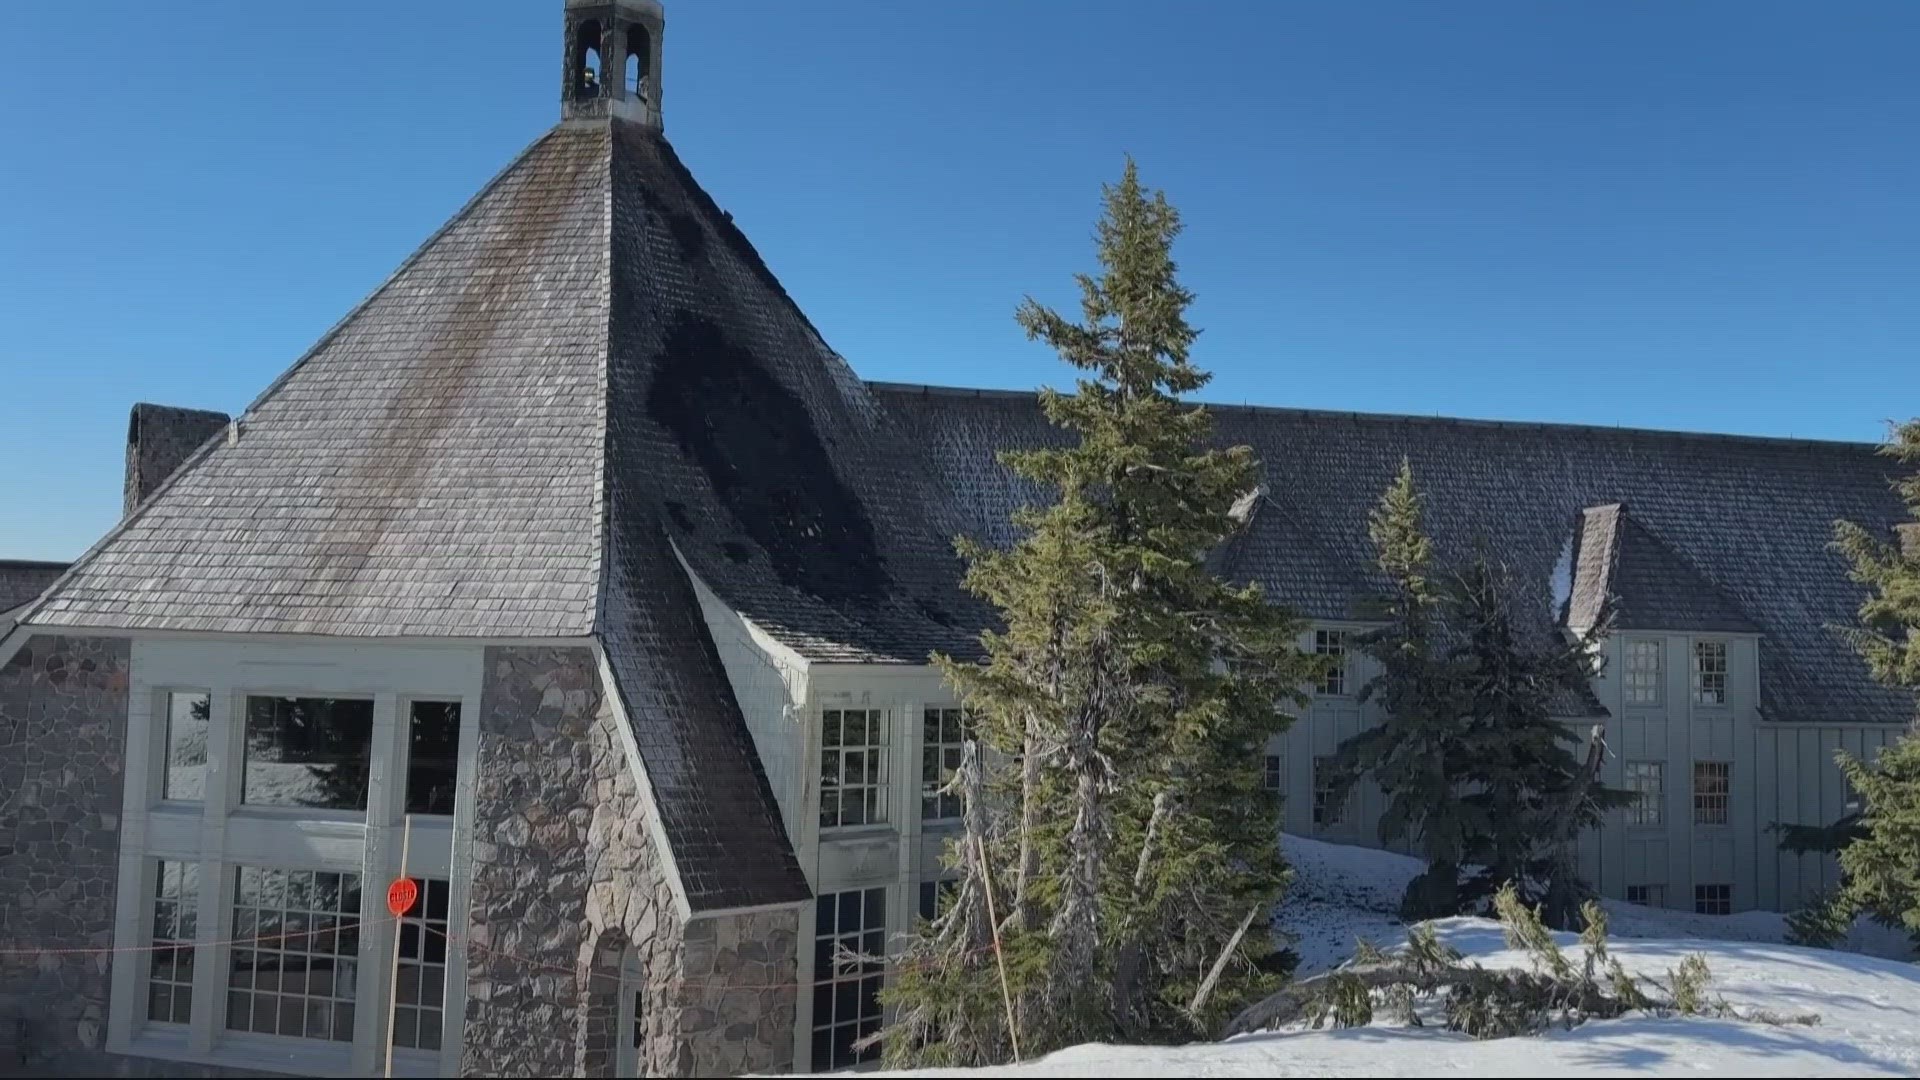 A fire broke out at the historic Timberline Lodge Thursday evening. So far, damages appear to be minimal, Timberline said.